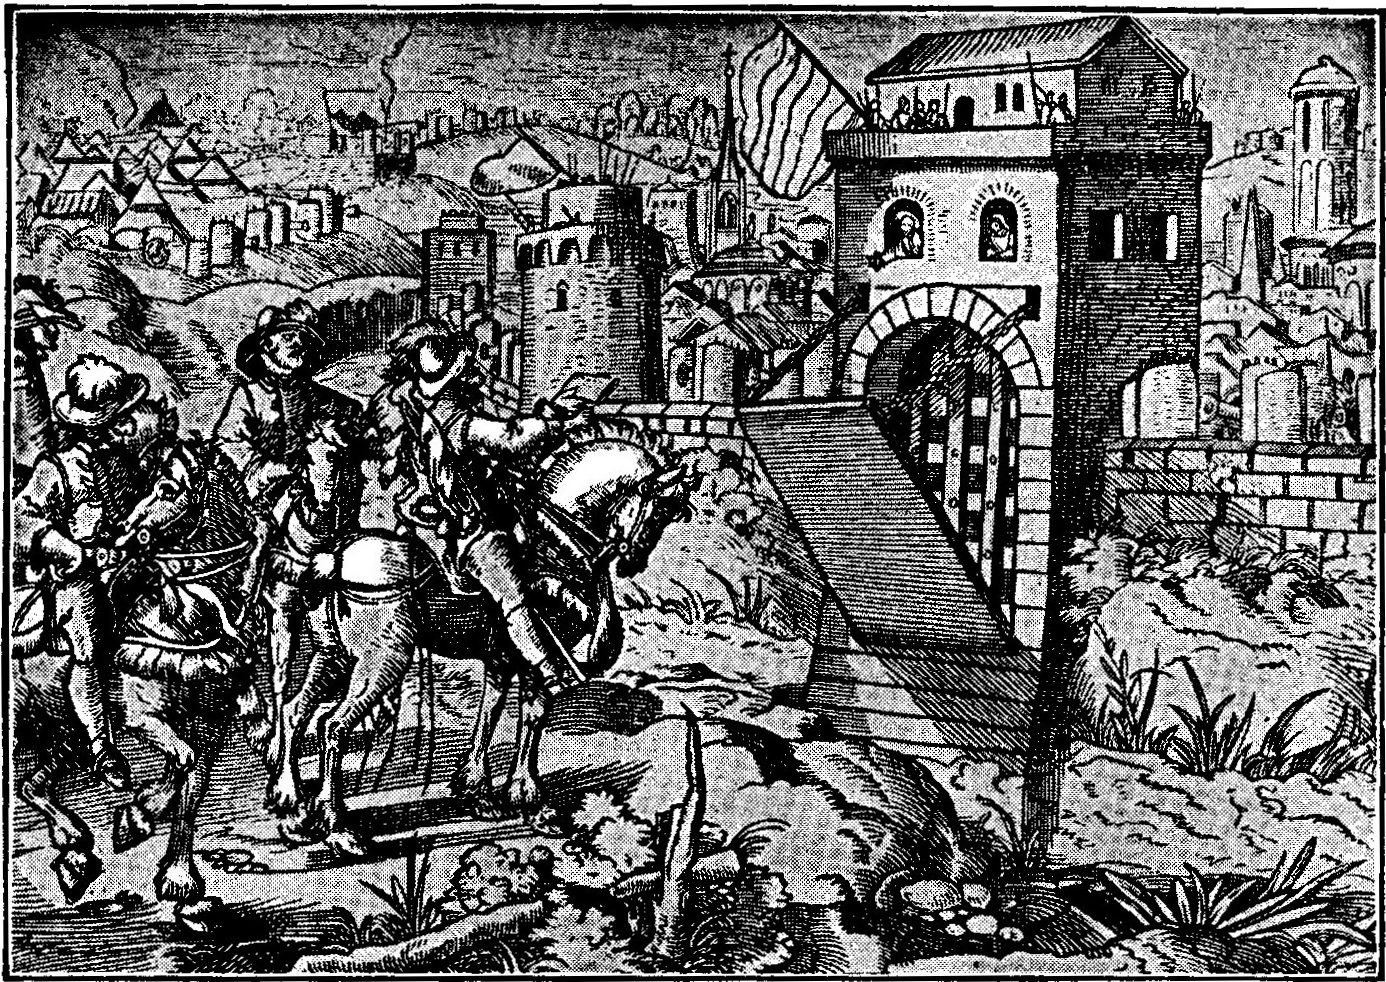 SIEGE OF A MEDIEVAL TOWN From a sixteenth-century copper engraving, showing the summons to surrender.